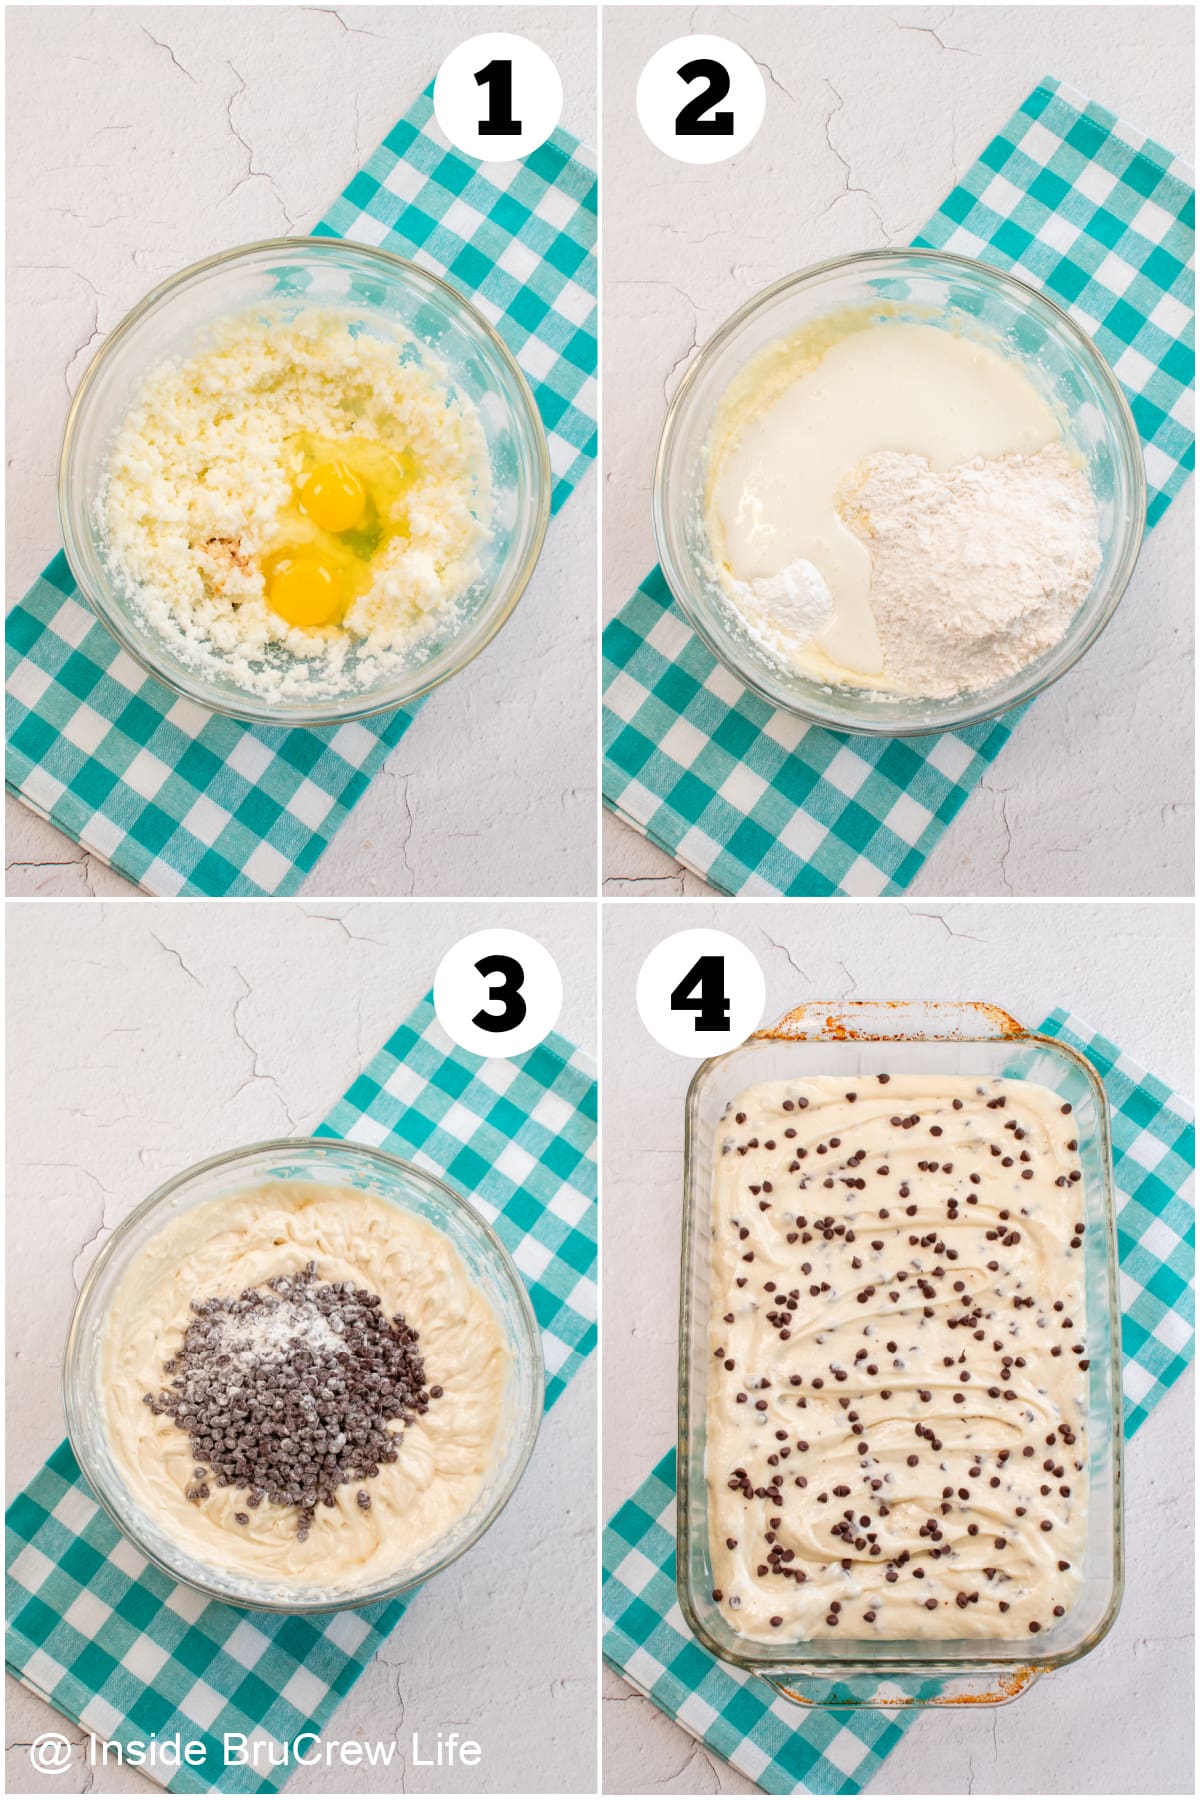 Four pictures collaged together showing how to make a cake with chocolate chips.